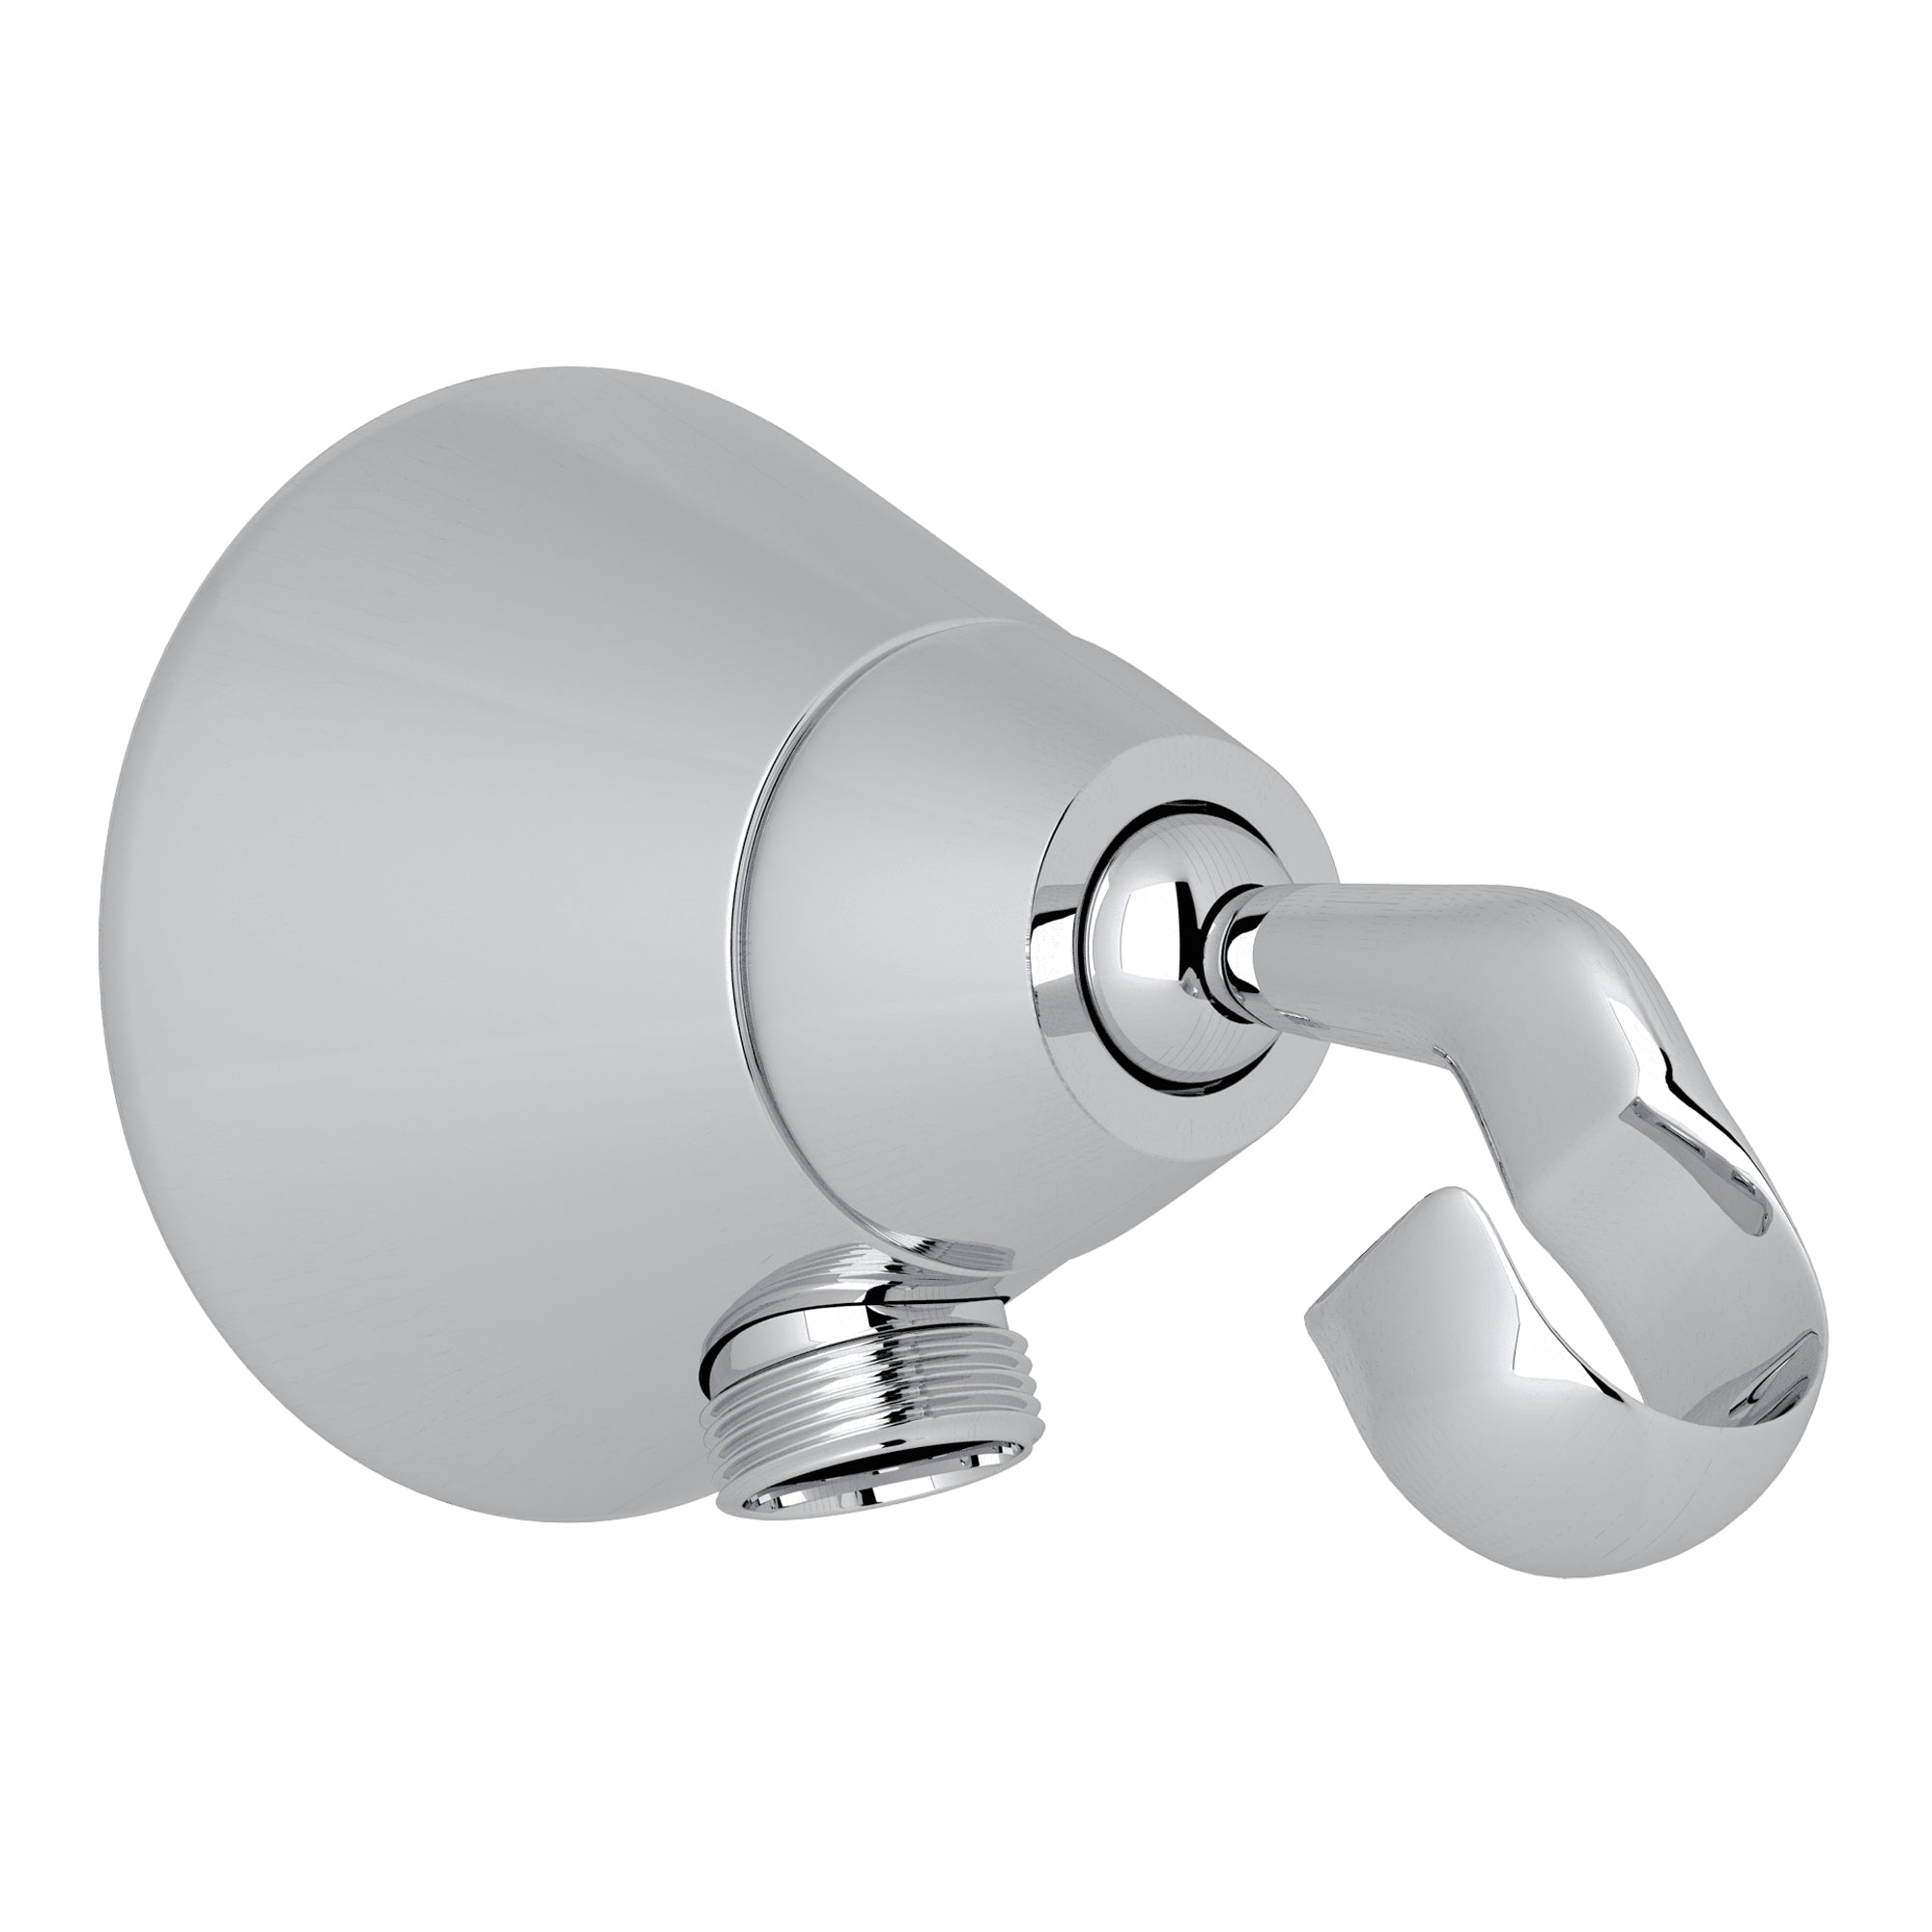 ROHL C21000 Handshower Outlet With Holder